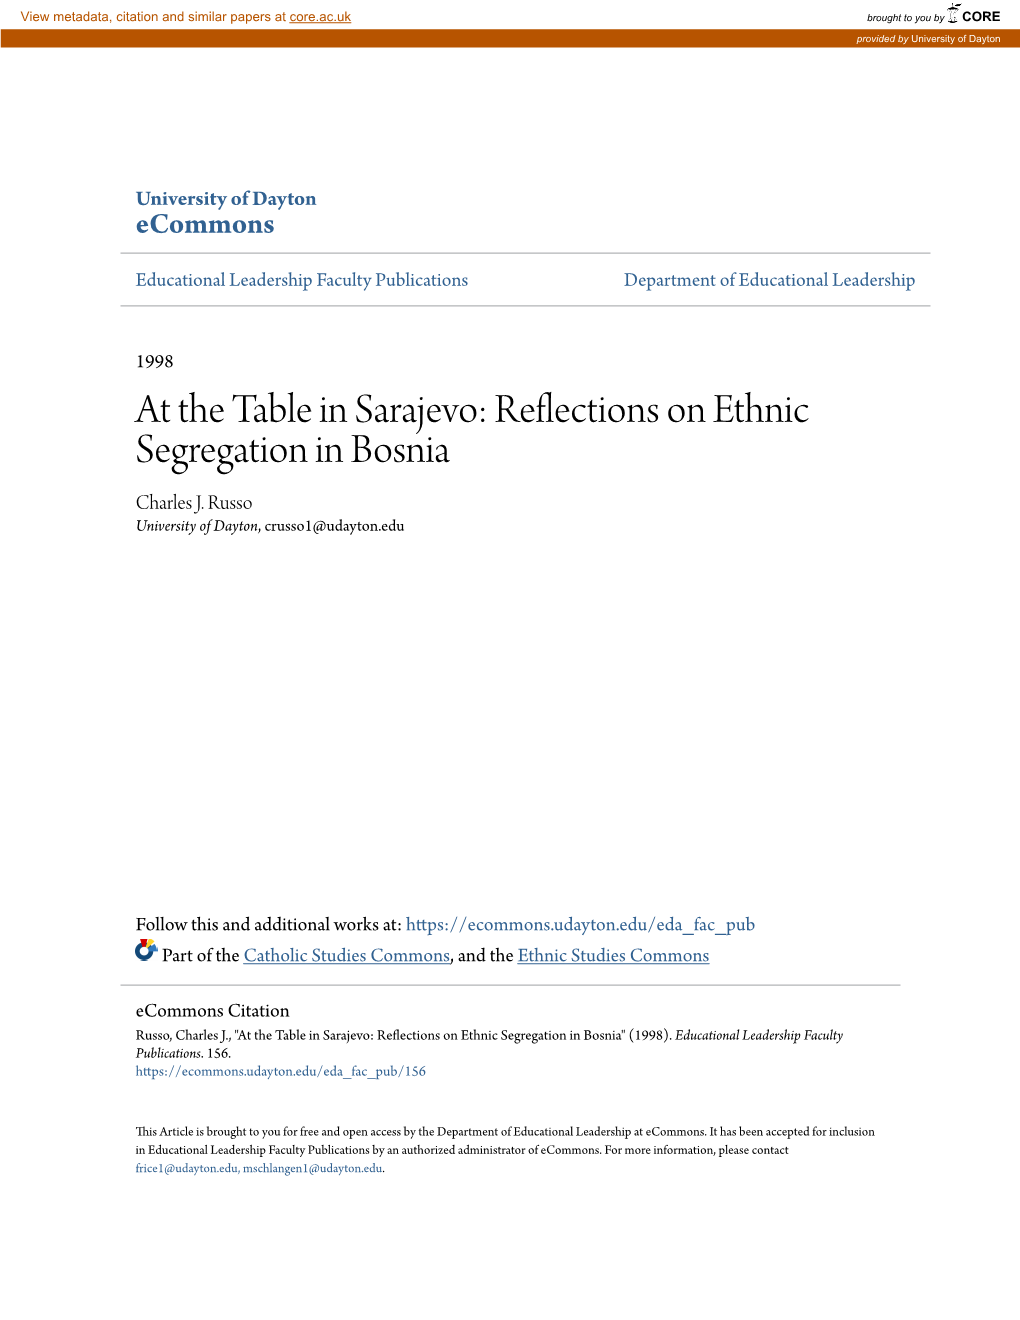 At the Table in Sarajevo: Reflections on Ethnic Segregation in Bosnia Charles J